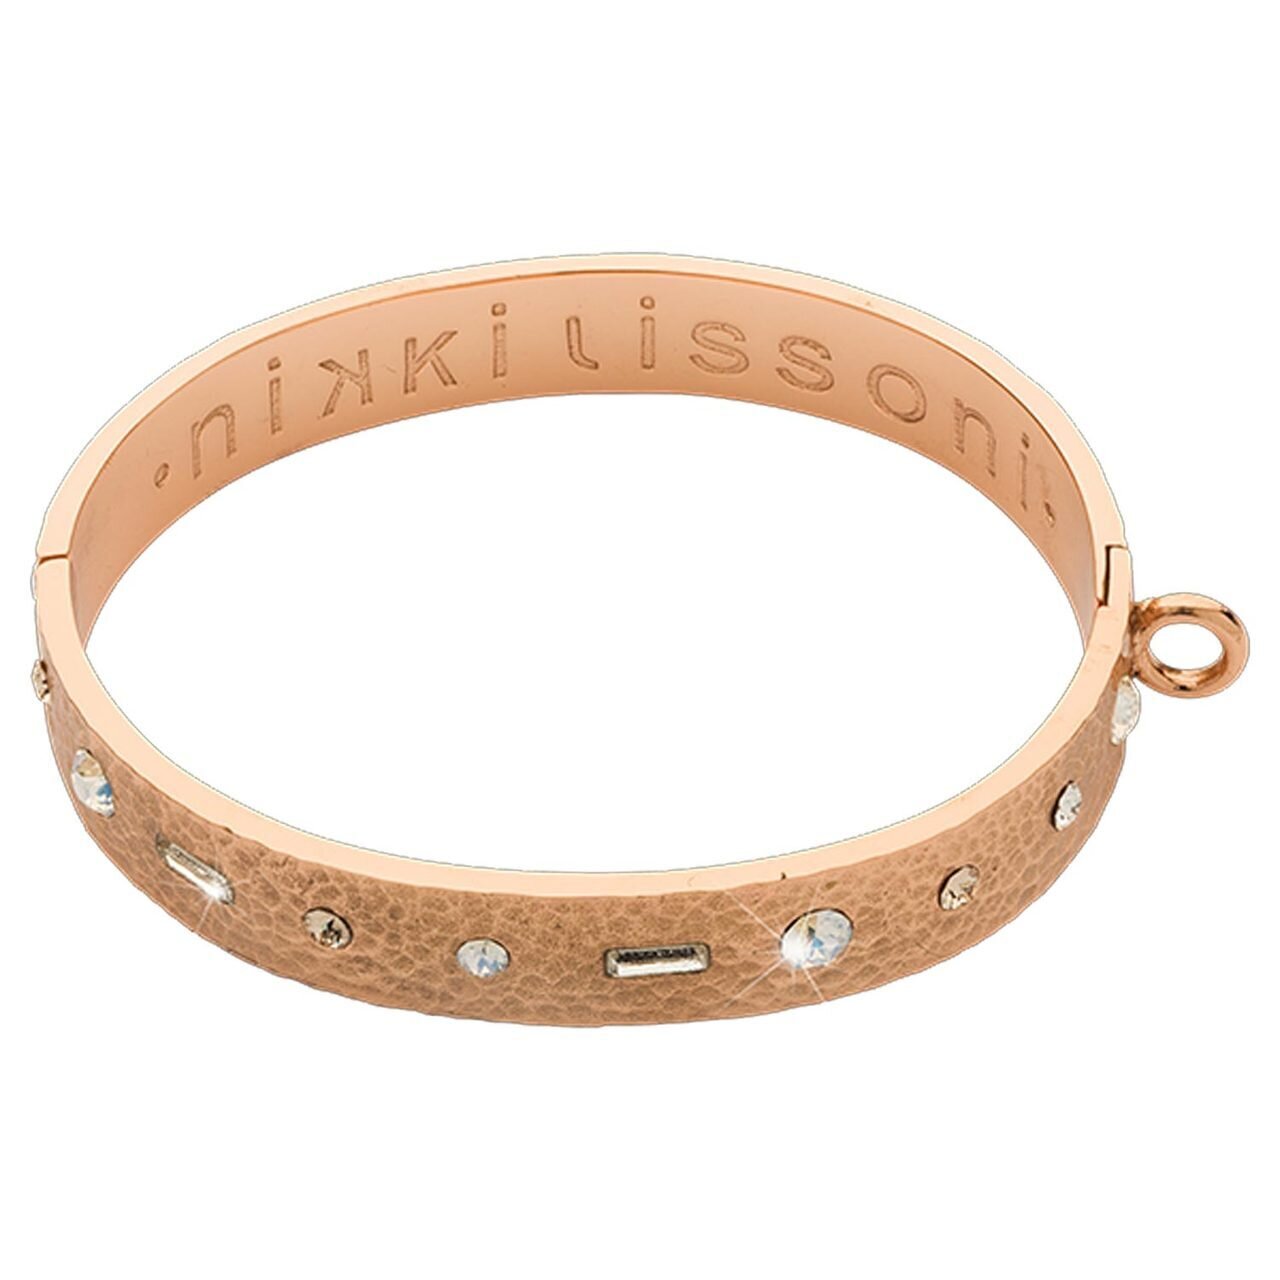 Nikki Lissoni Hammered Bangle of 14mm Swarovski Crystals One Loop To Attach A Charm Rose Gold-plated 17cm B1161RG17